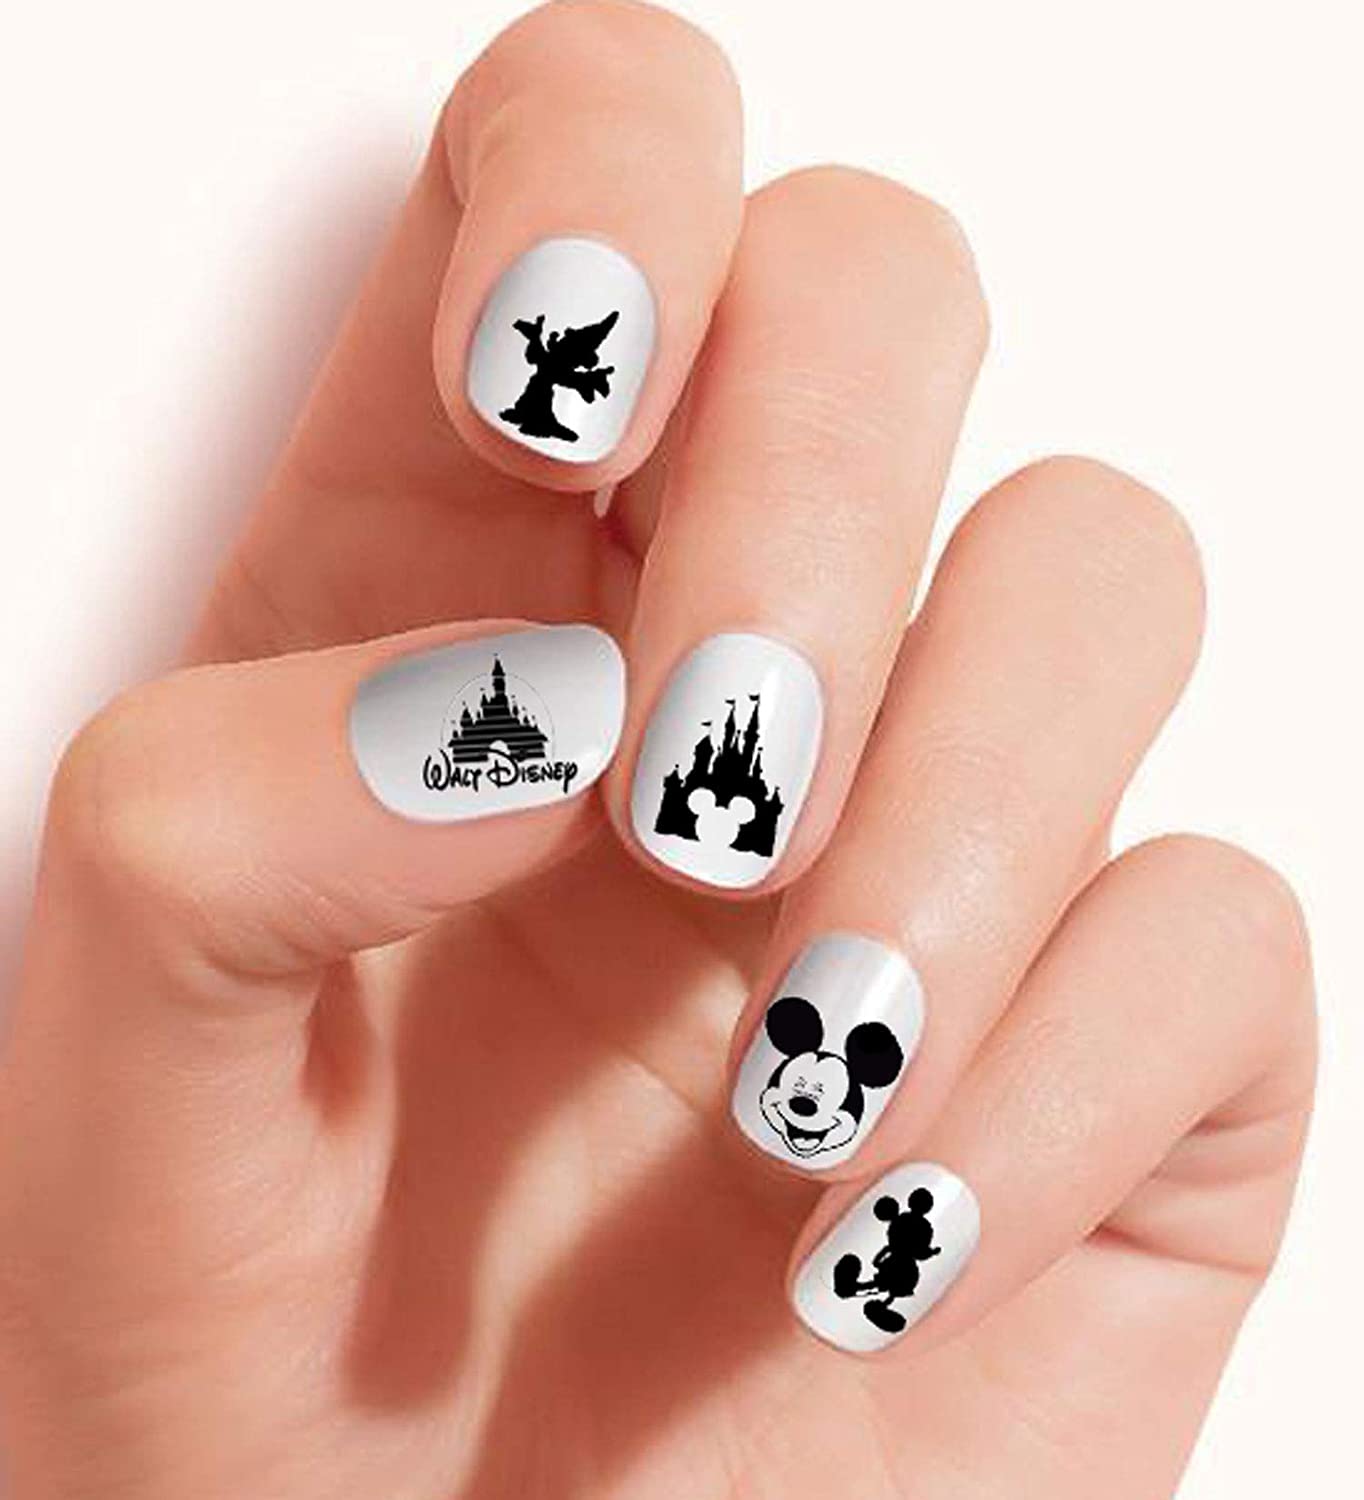 Clear Vinyl Cut, Peel and Stick Nail Art Decals/Stickers by DimOxy Designs Themed for Mickey Black and White (Ver.1) Lovers.